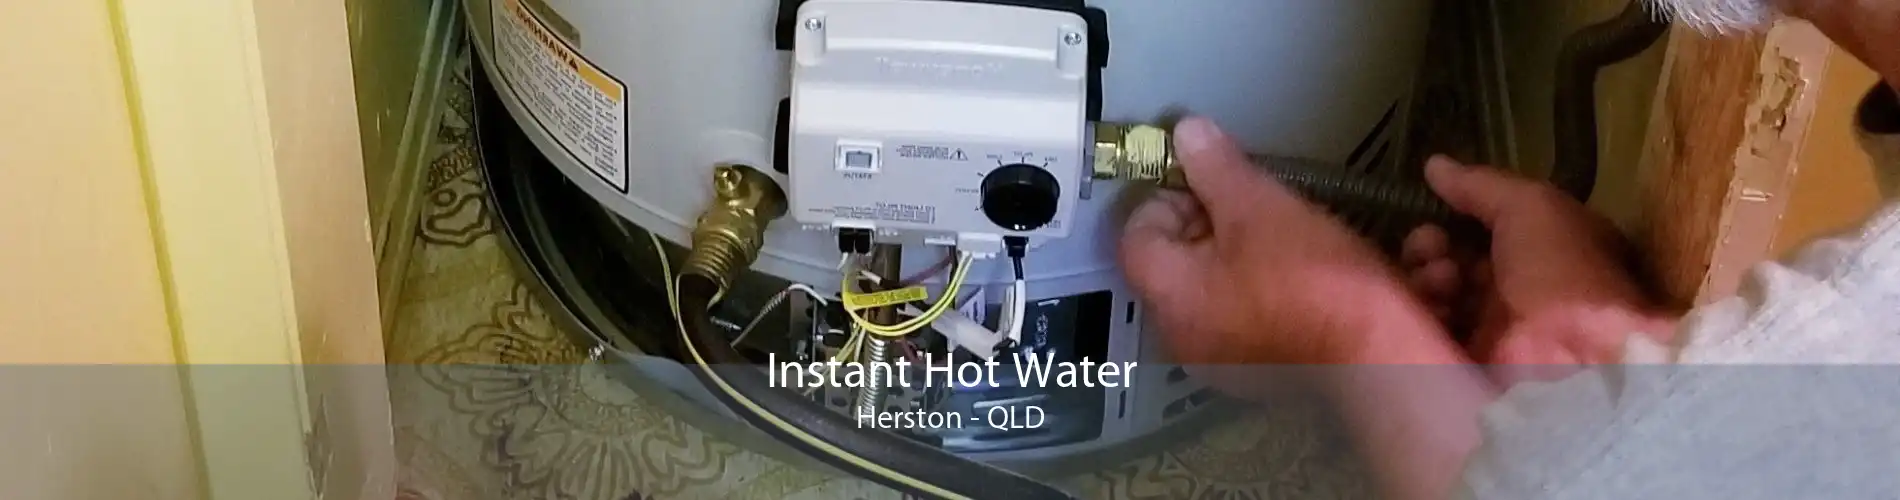 Instant Hot Water Herston - QLD